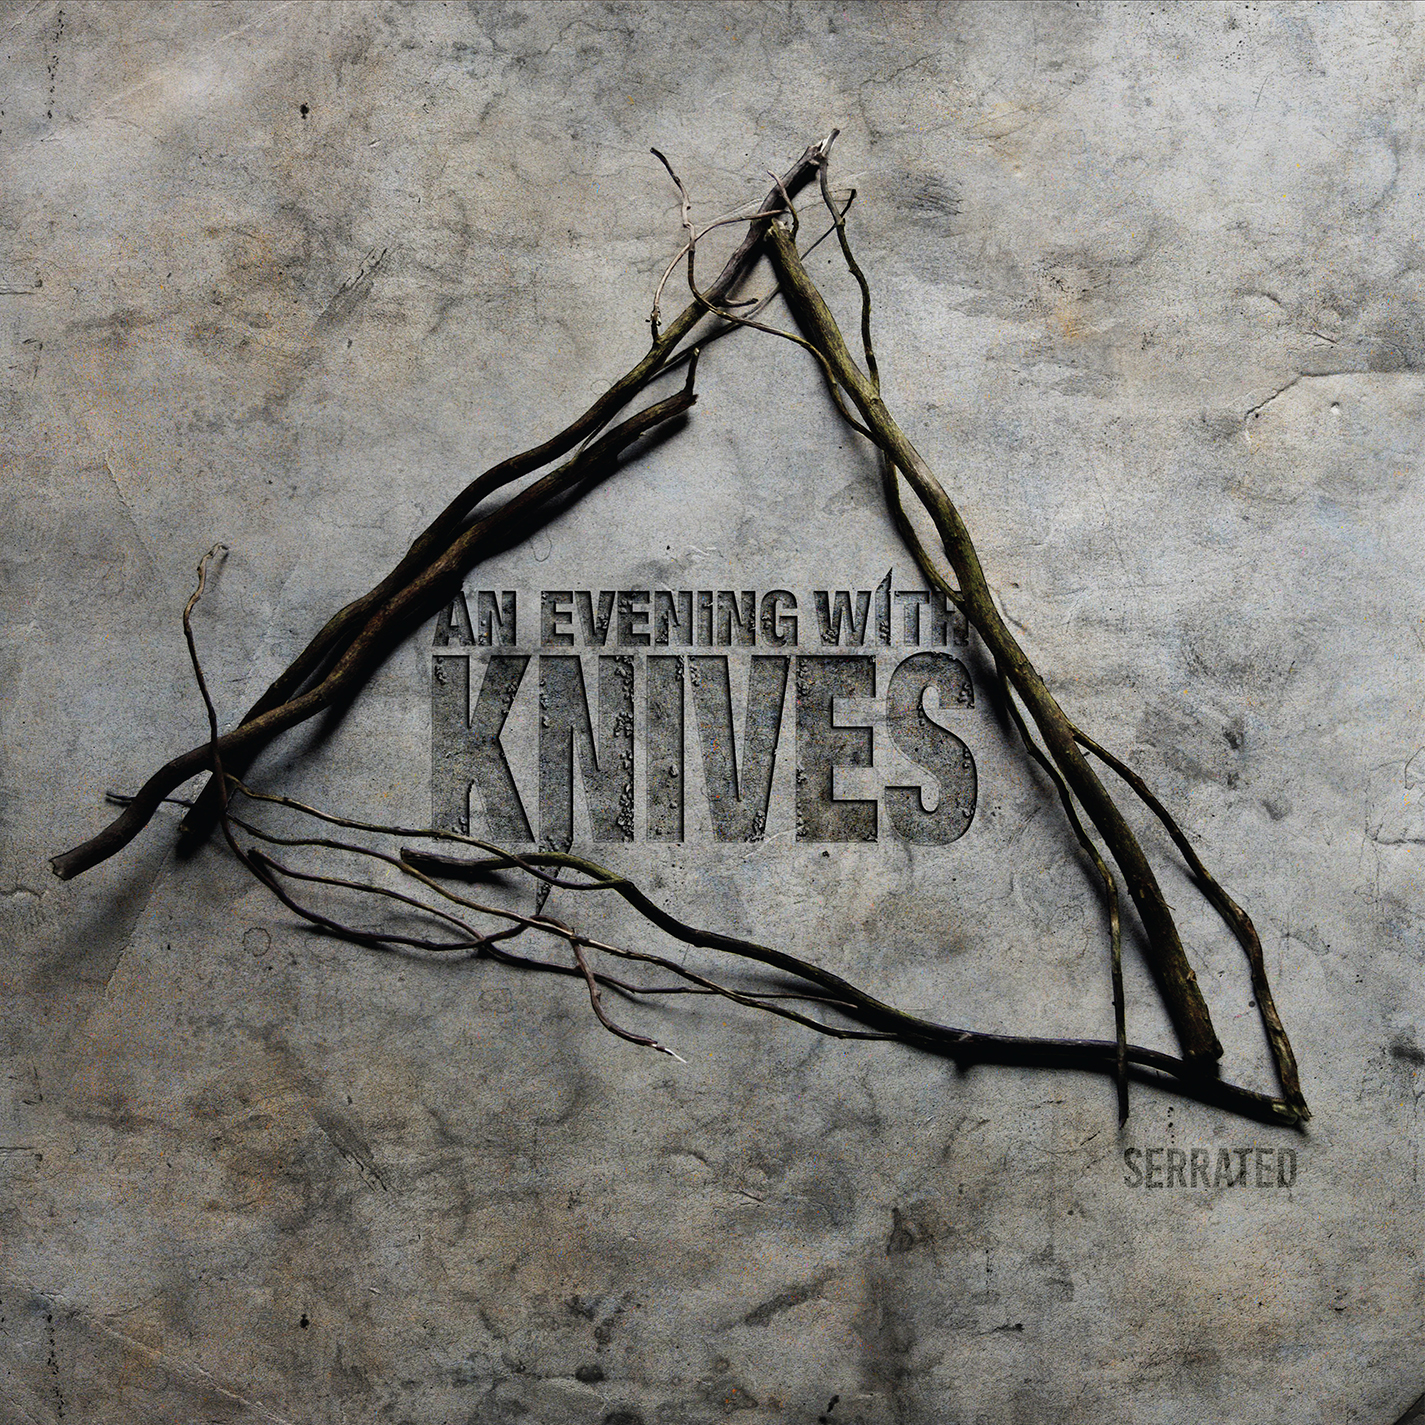 An Evening With Knives Serrated front low res